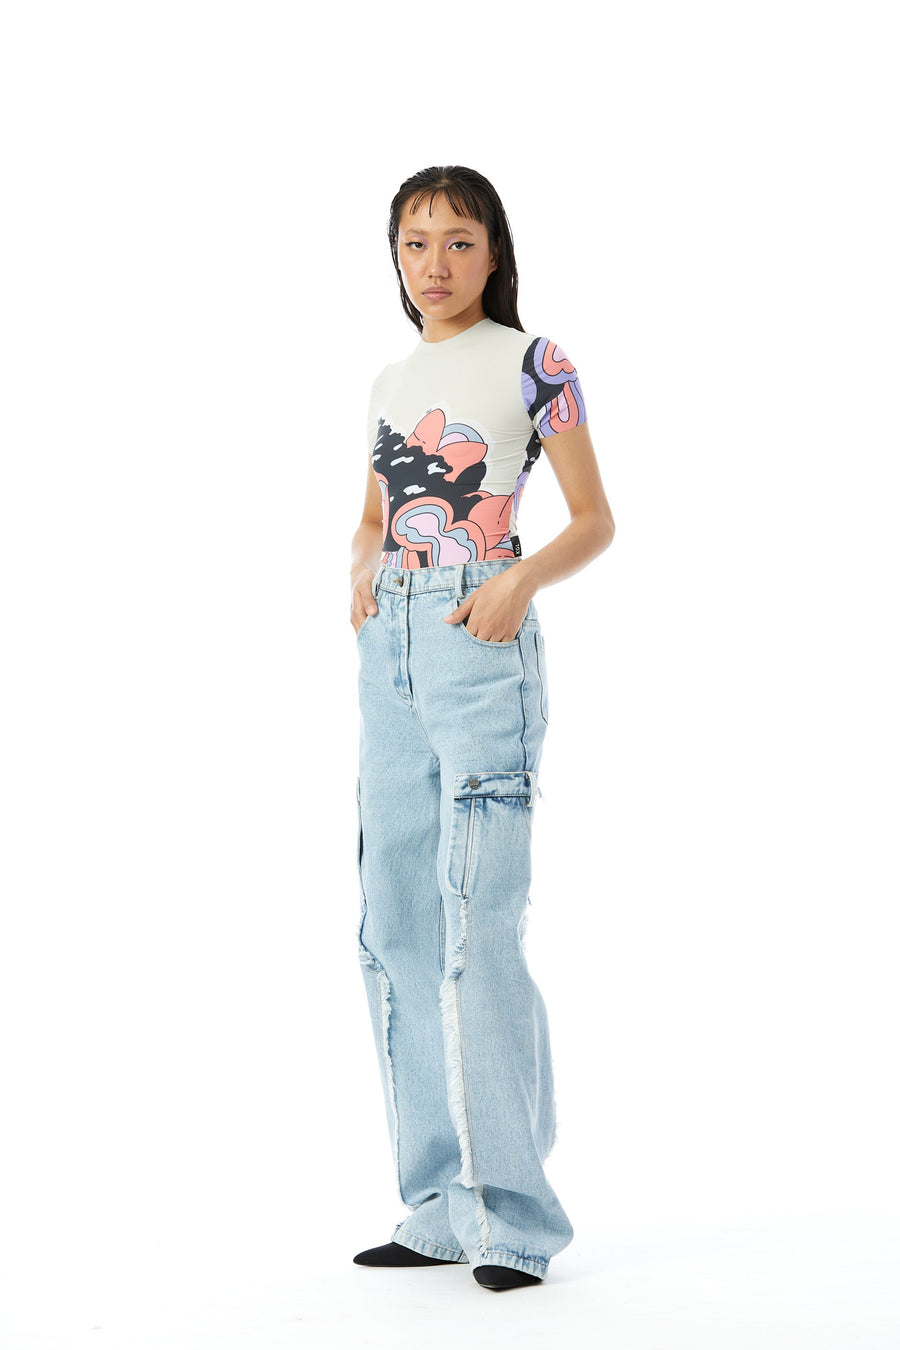 'Banksia' Fitted Top - Kanika Goyal Label